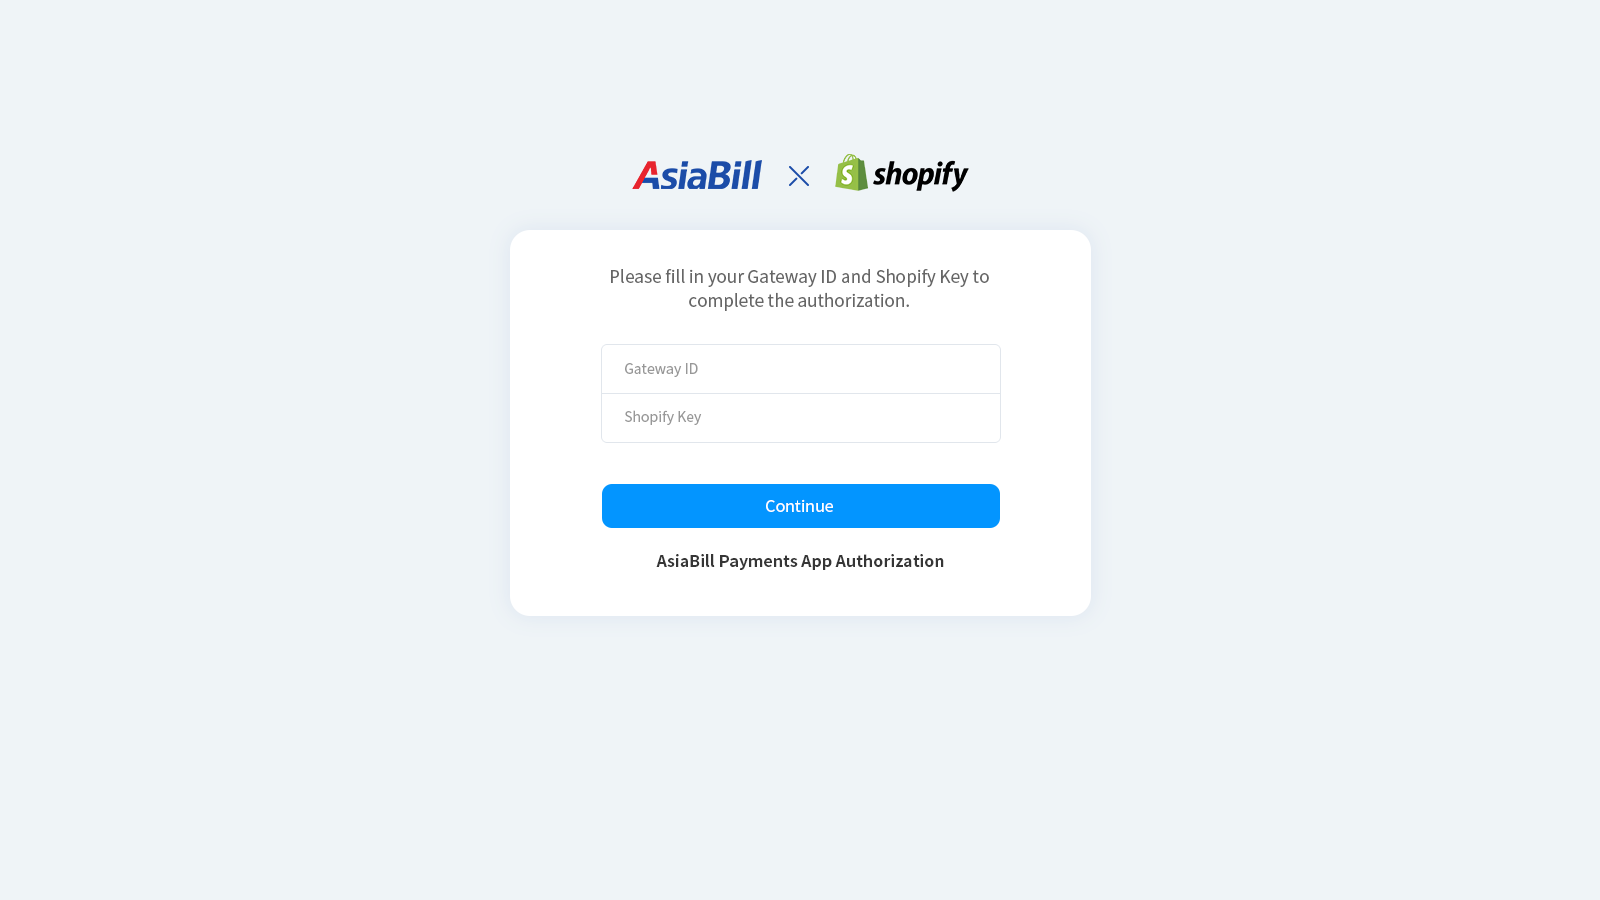 Fill in your Gateway ID and Shopify Key for authorization.